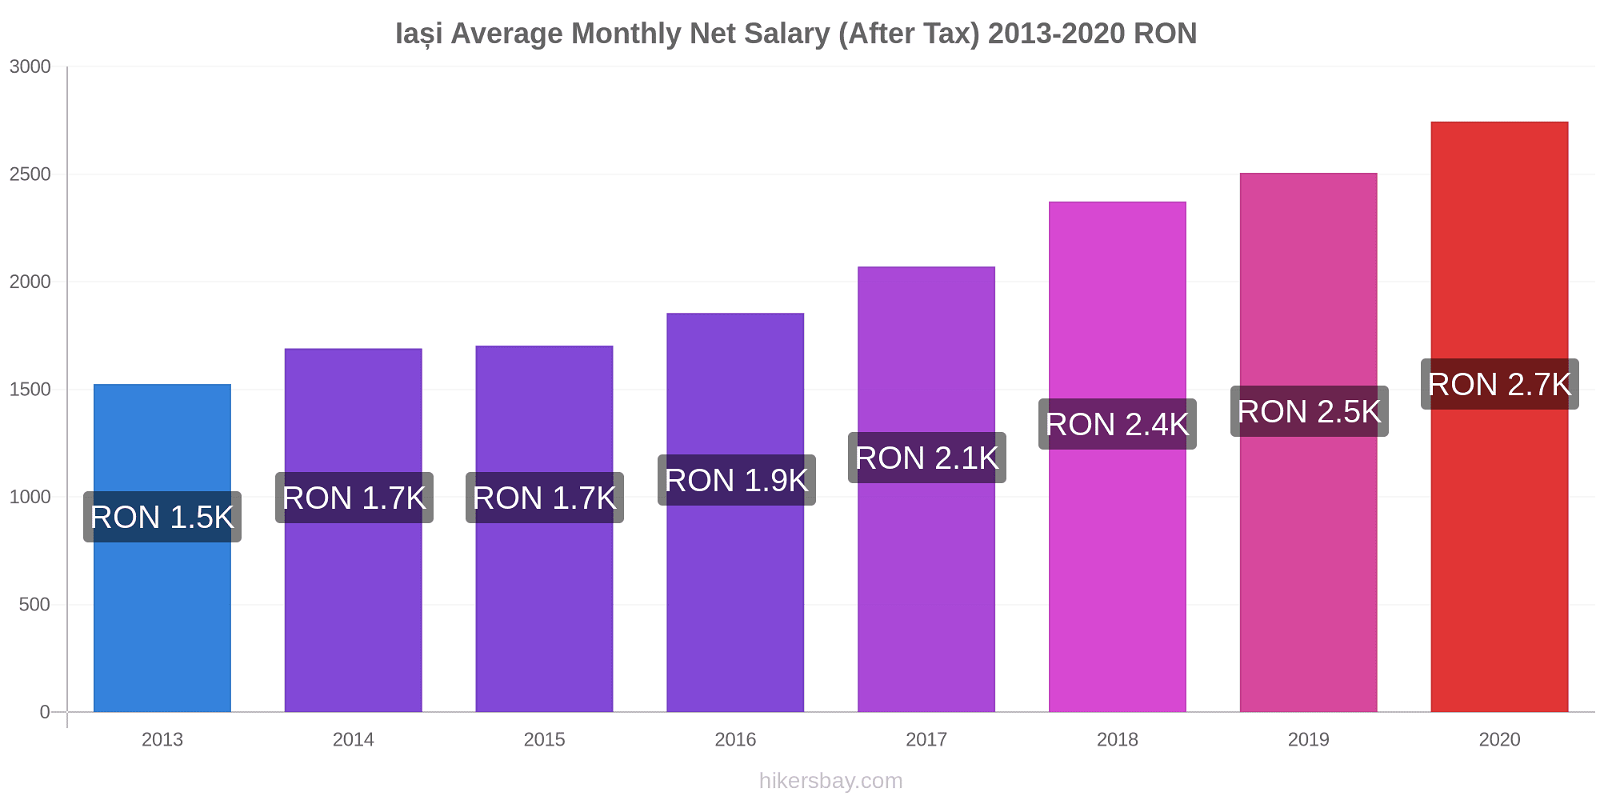 Iași price changes Average Monthly Net Salary (After Tax) hikersbay.com